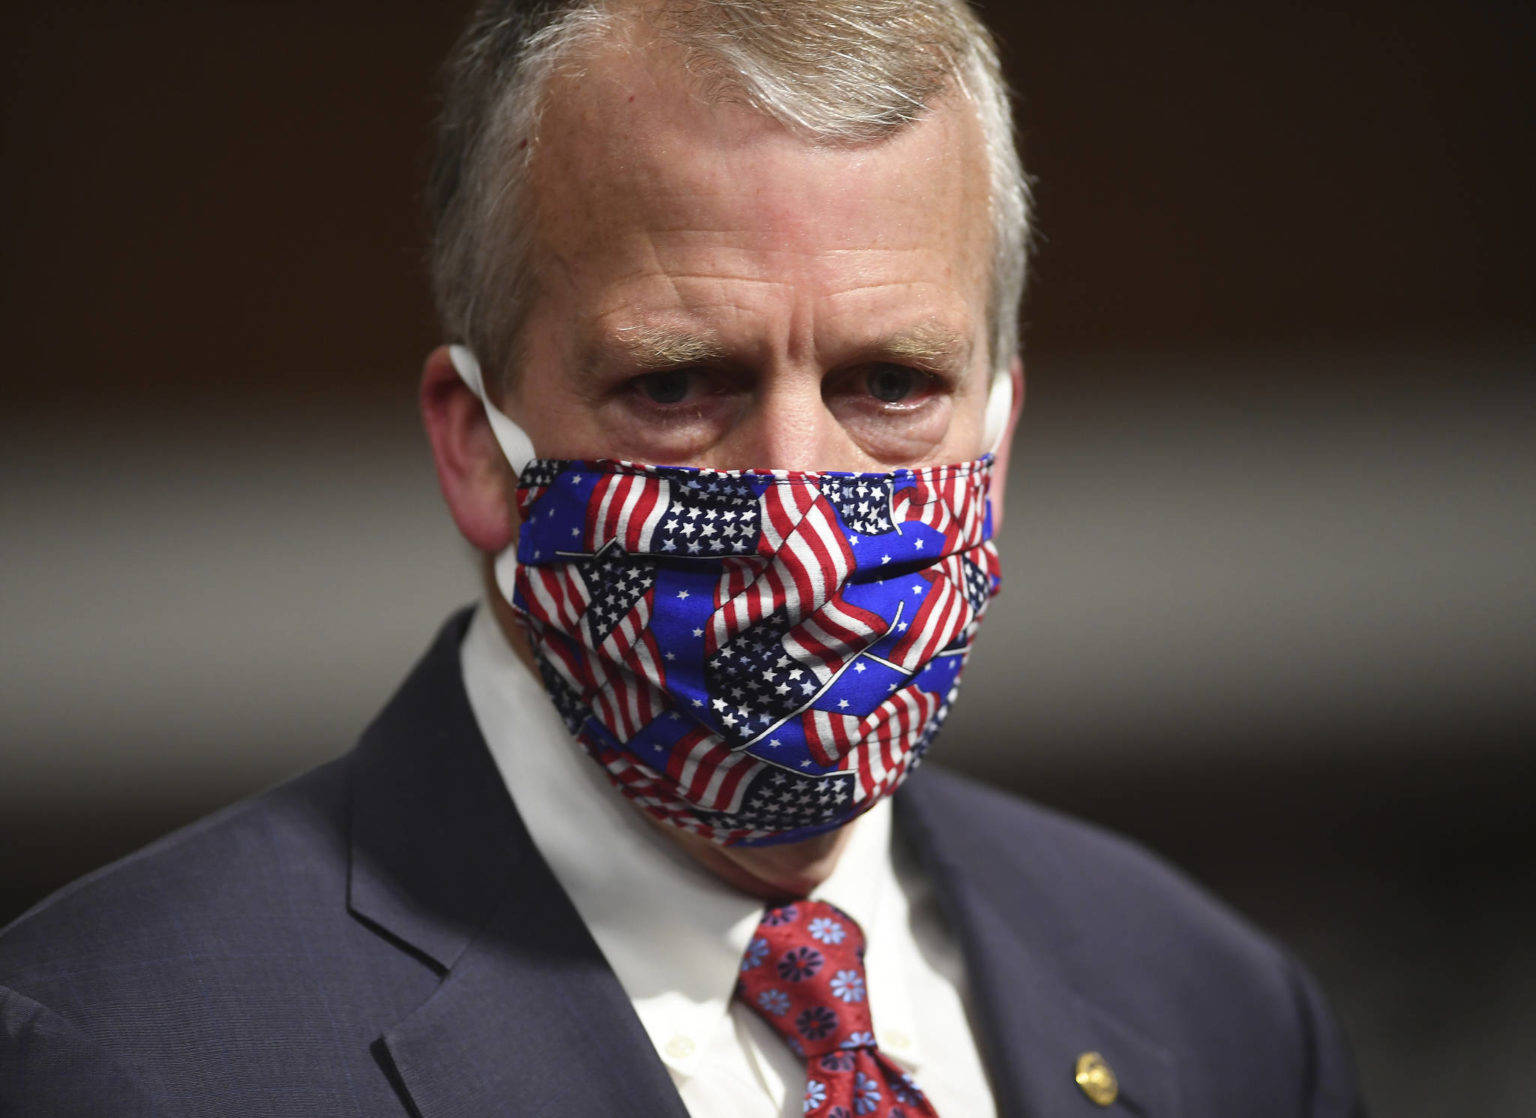 Kevin Dietsch/Pool via AP, File                                In this May 7, 2020 photo, Sen. Dan Sullivan wears a mask at a hearing in Washington. Sullivan’s office released a statement Monday saying the senator would support a confirmation vote to fill the vacancy on the U.S. Supreme Court even in an election year.